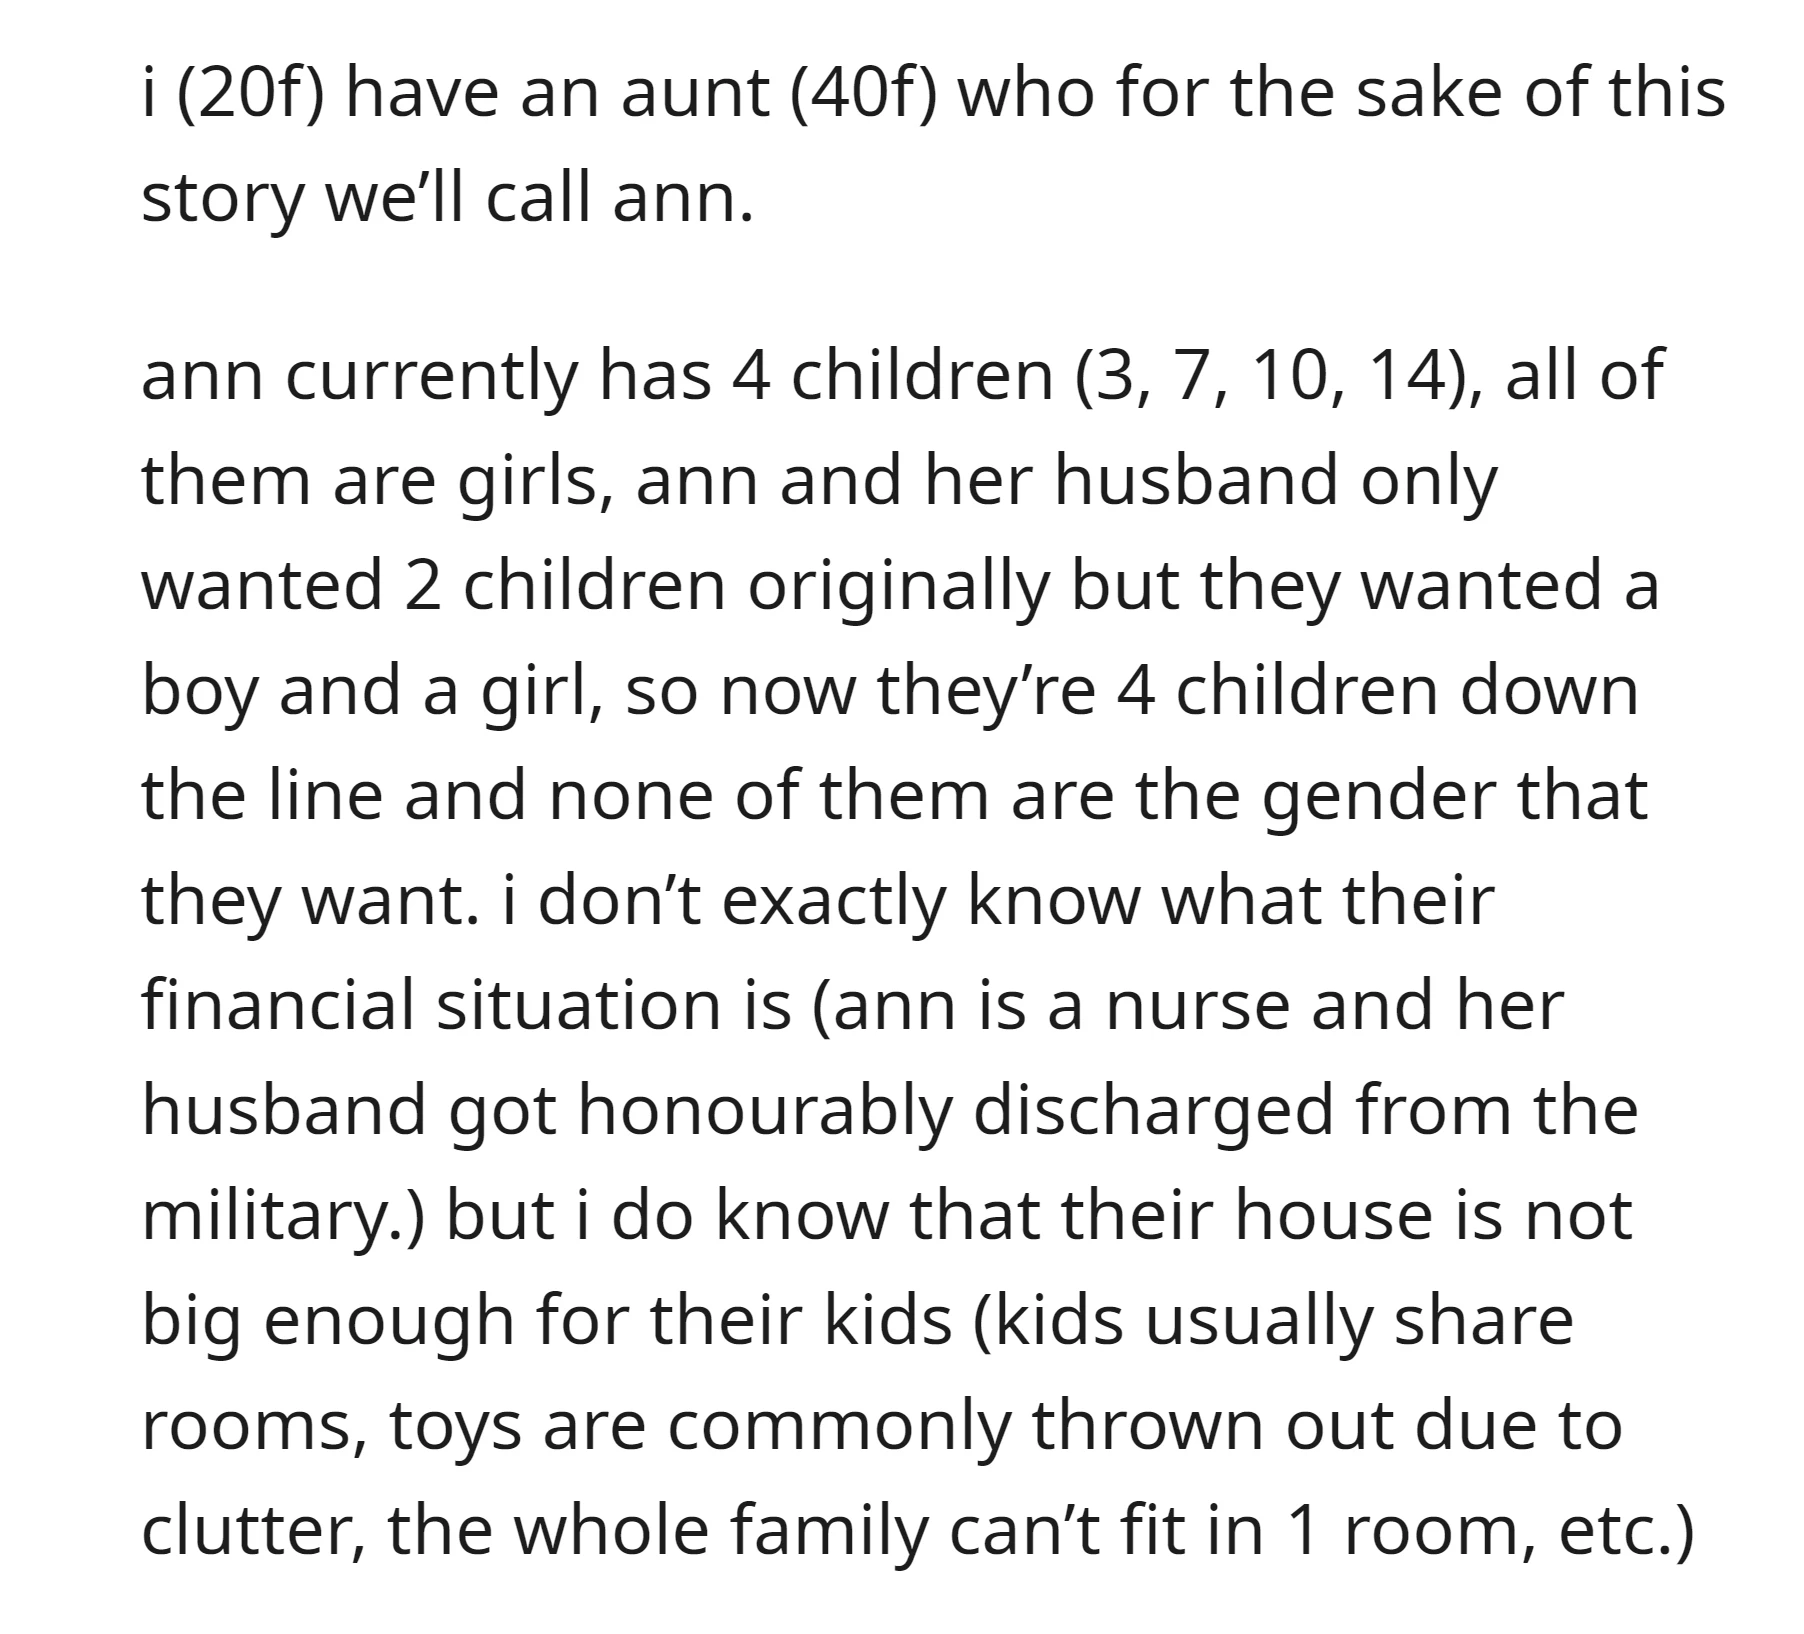 OP's aunt is now facing overcrowded living conditions in a too-small house with financial constraints